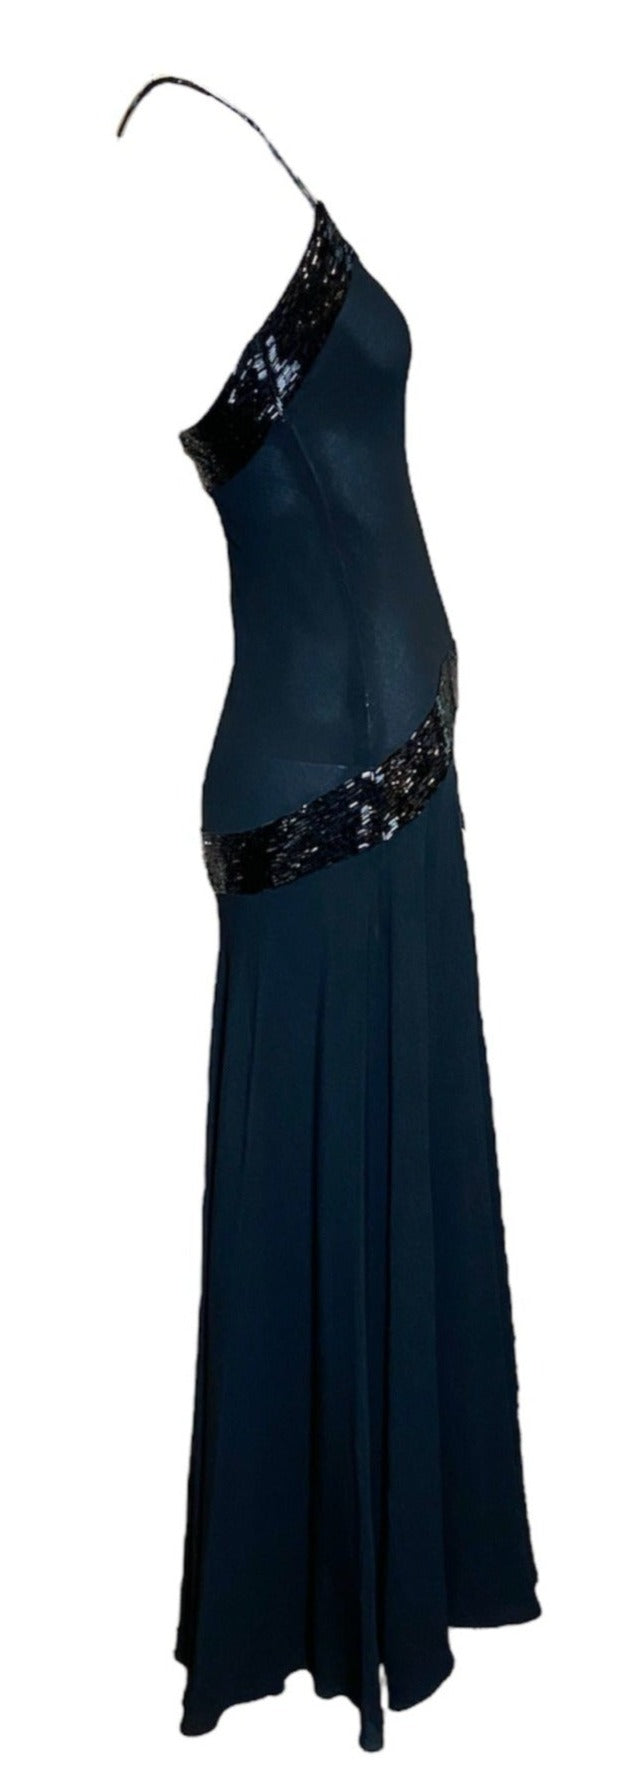 1930s Black Crepe Bias Cut Gown with Beaded Bow  at Hip SIDE 2 of 5